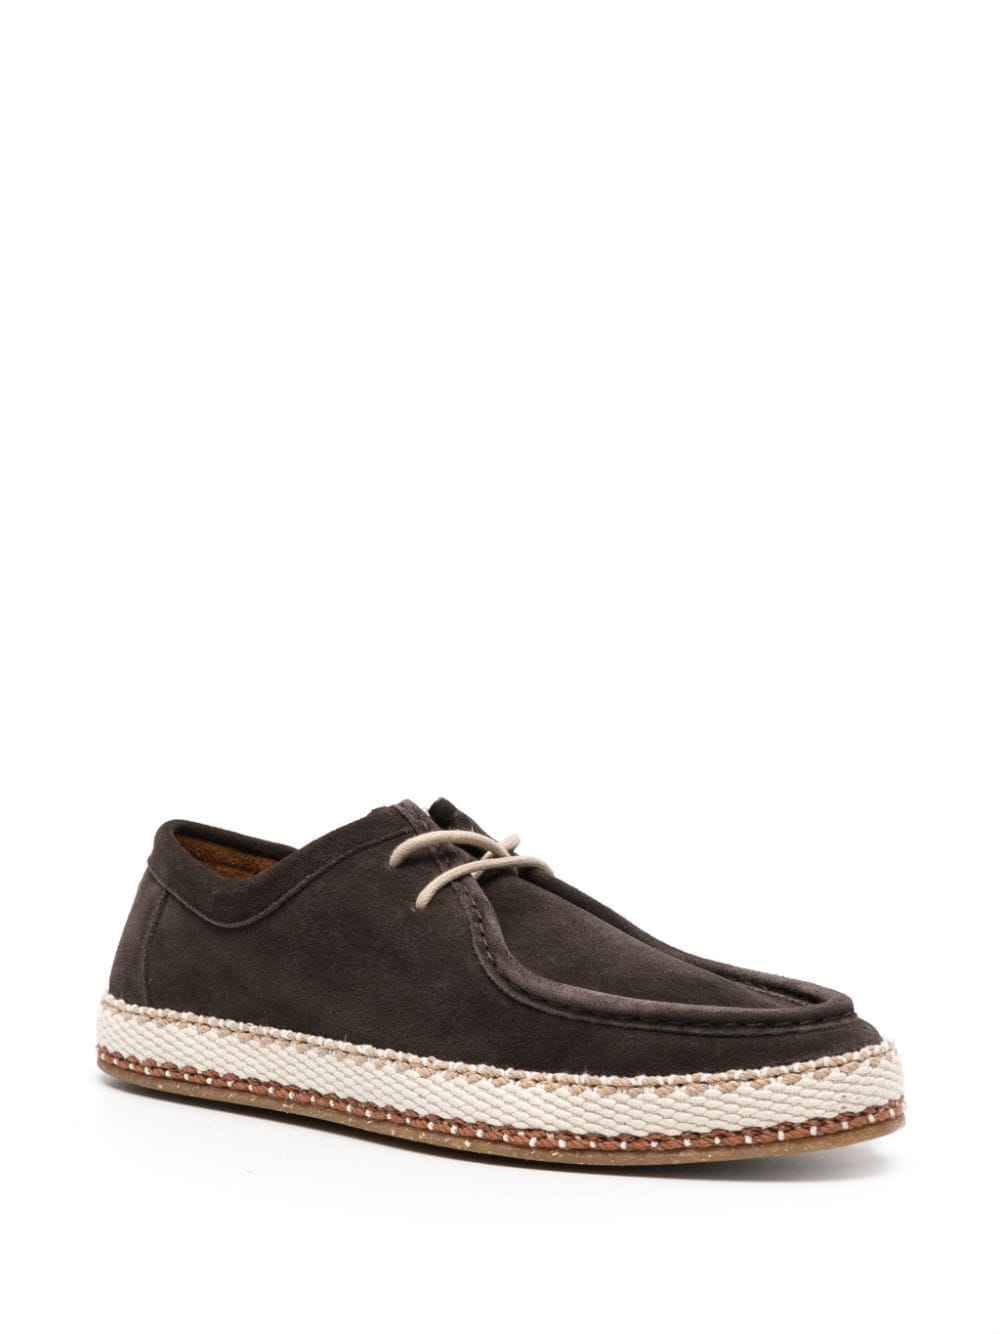 Canali woven-sole suede boat shoes - Bruin